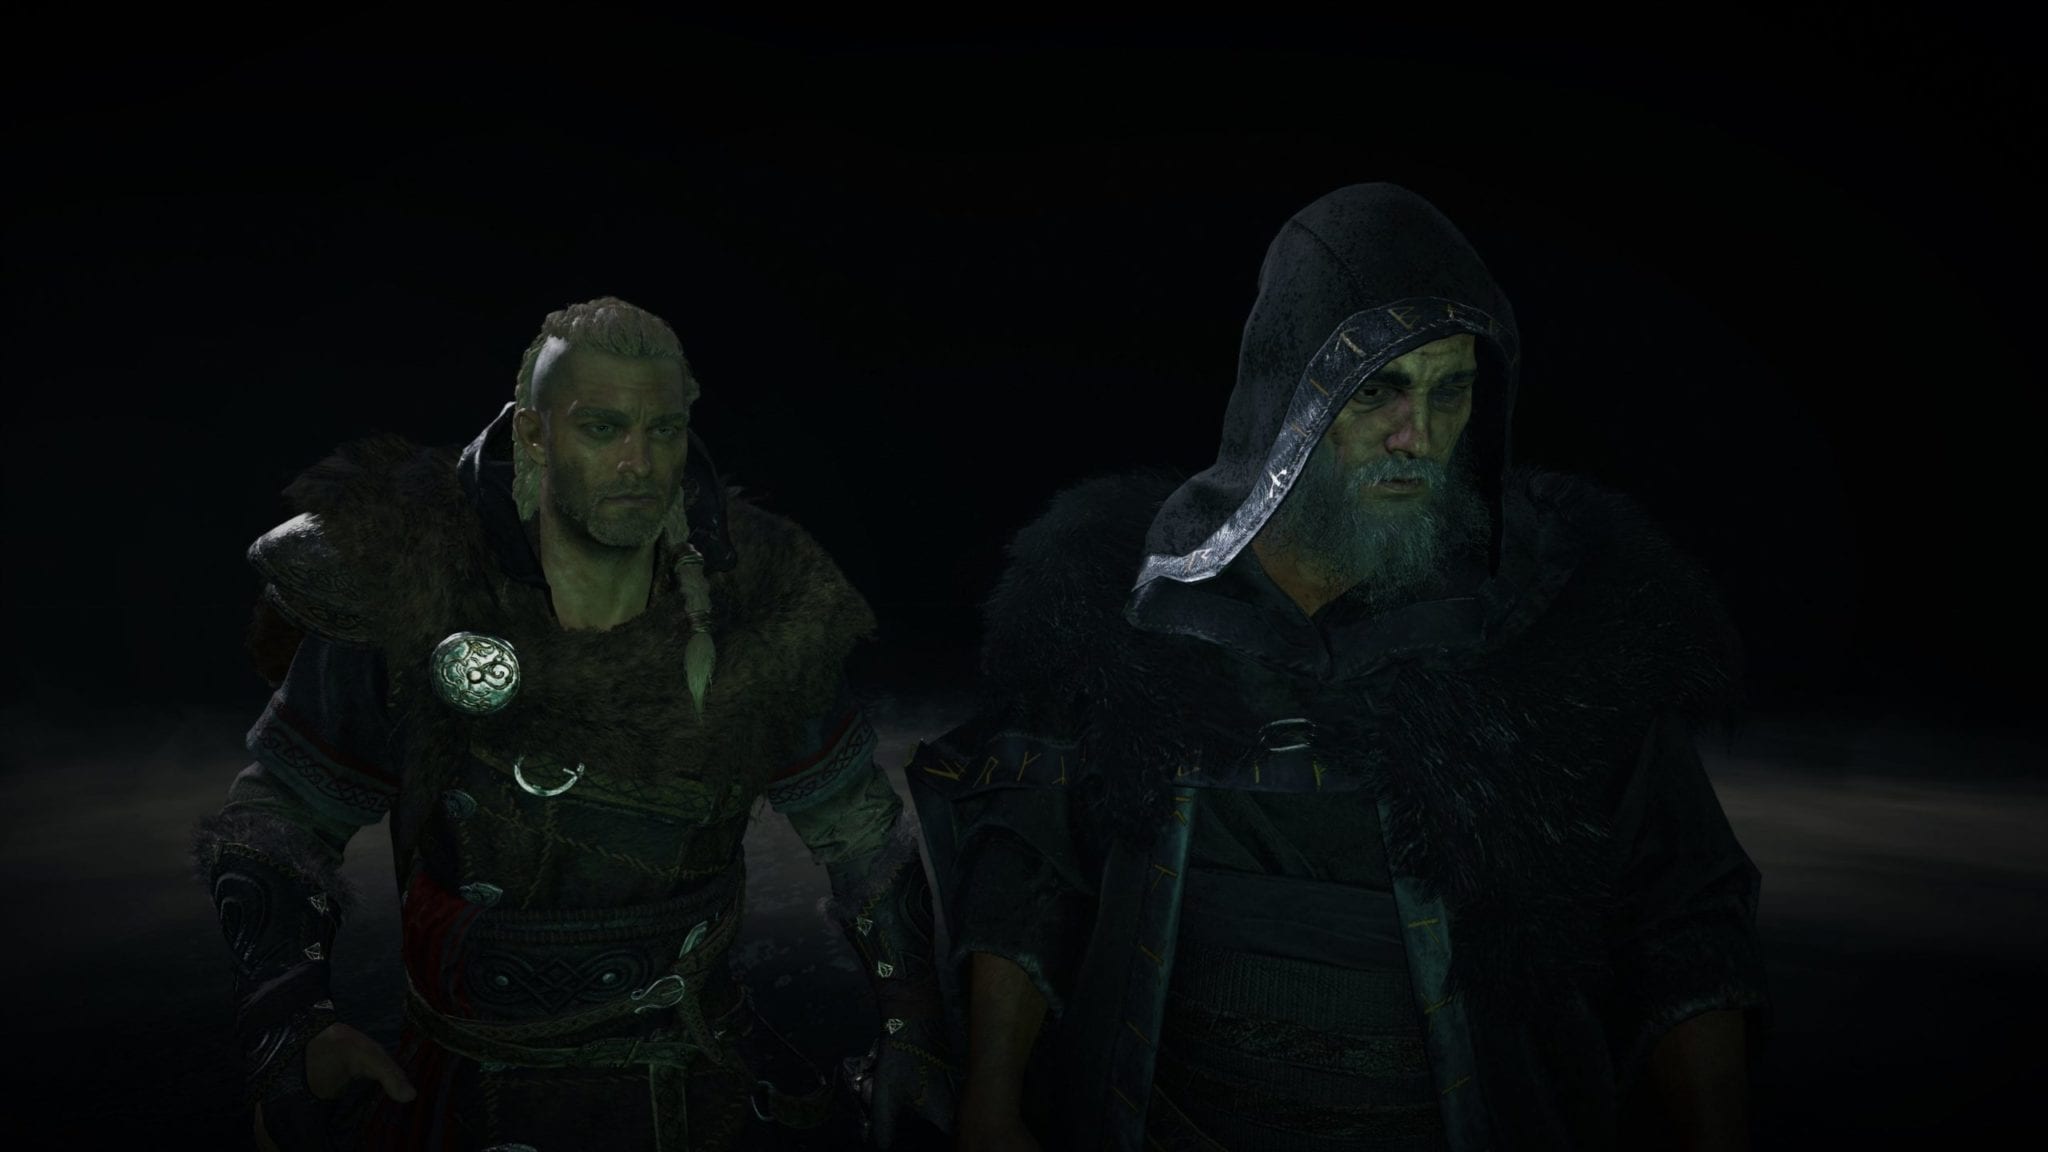 Eivor and Odin in Assassin's Creed Valhalla